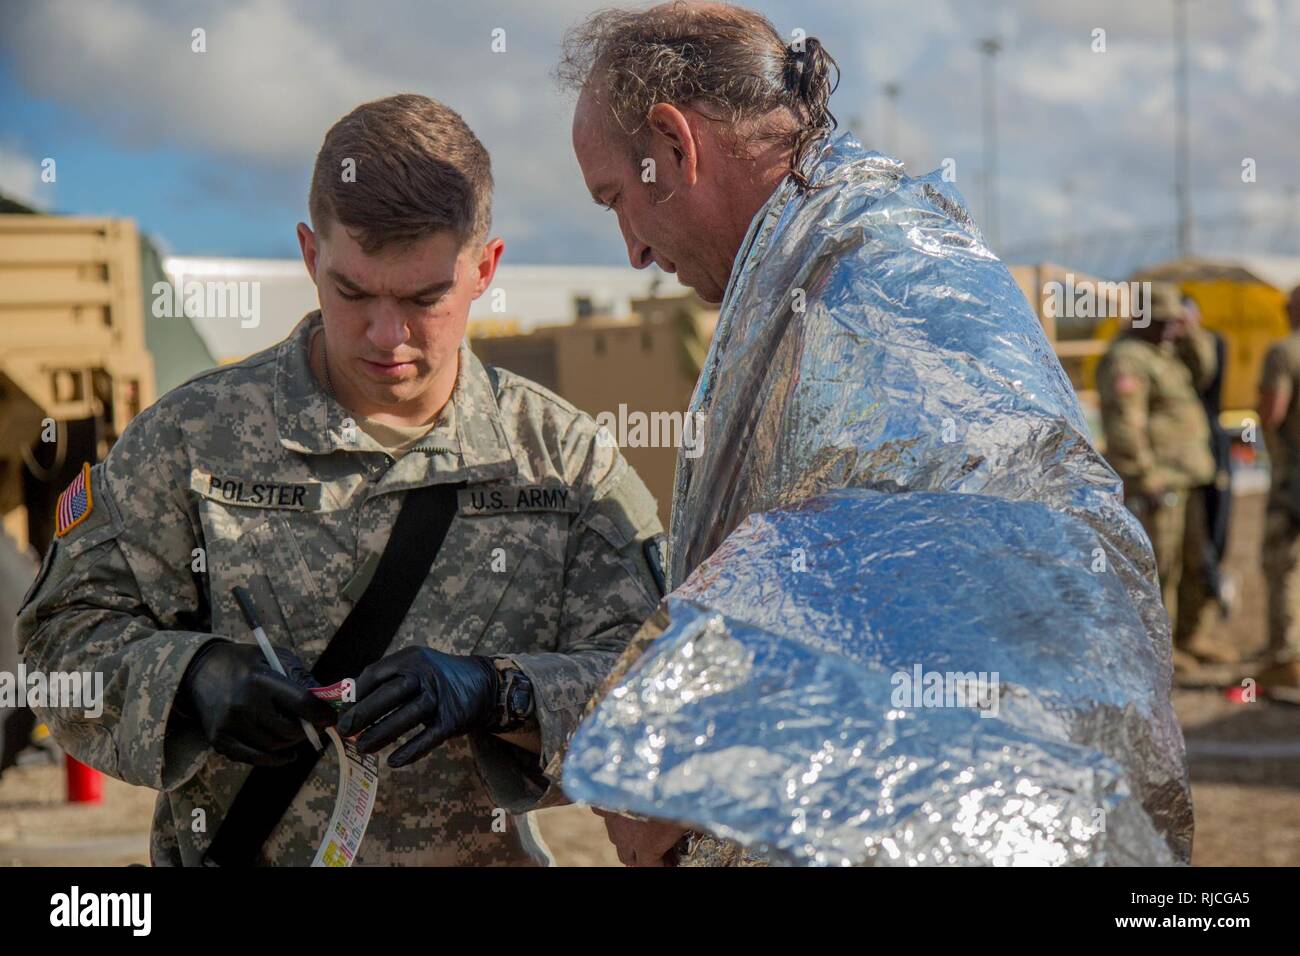 U.S. Army Sgt. Austin Polster of the 409th Area Support Medical Company, triage a casualty for a simulated mass chemical attack during a Joint Training Exercise hosted by the Miami-Dade Fire Department and Homestead-Miami Speedway in Miami, Fla. Jan. 11, 2018. This JTE focused on building response capabilities and seamless the transition between the local first responders and the follow-on support provided by the National Guard and Active duty soldiers. (U. S. Army Stock Photo